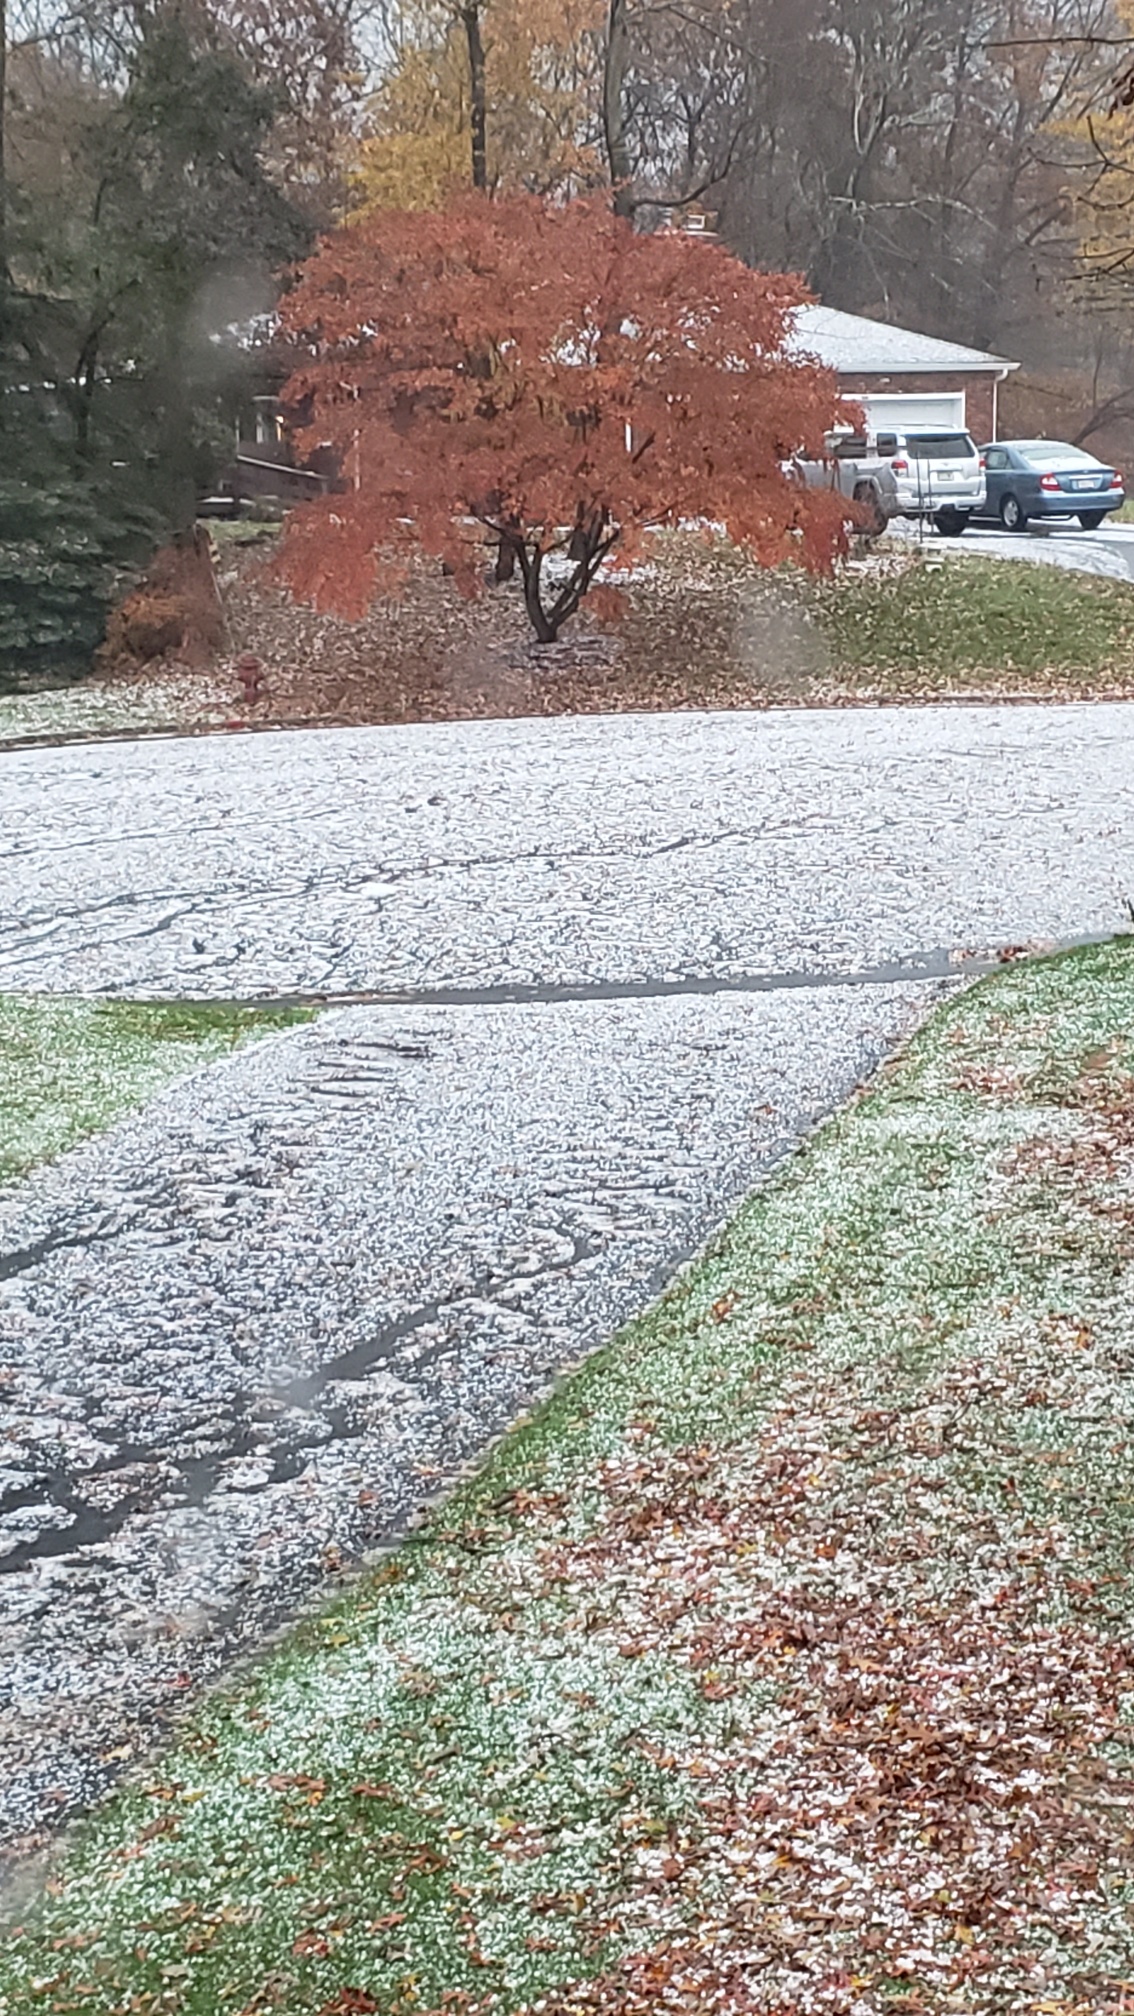 Hail covering the ground in Jefferson Township on November 13th.